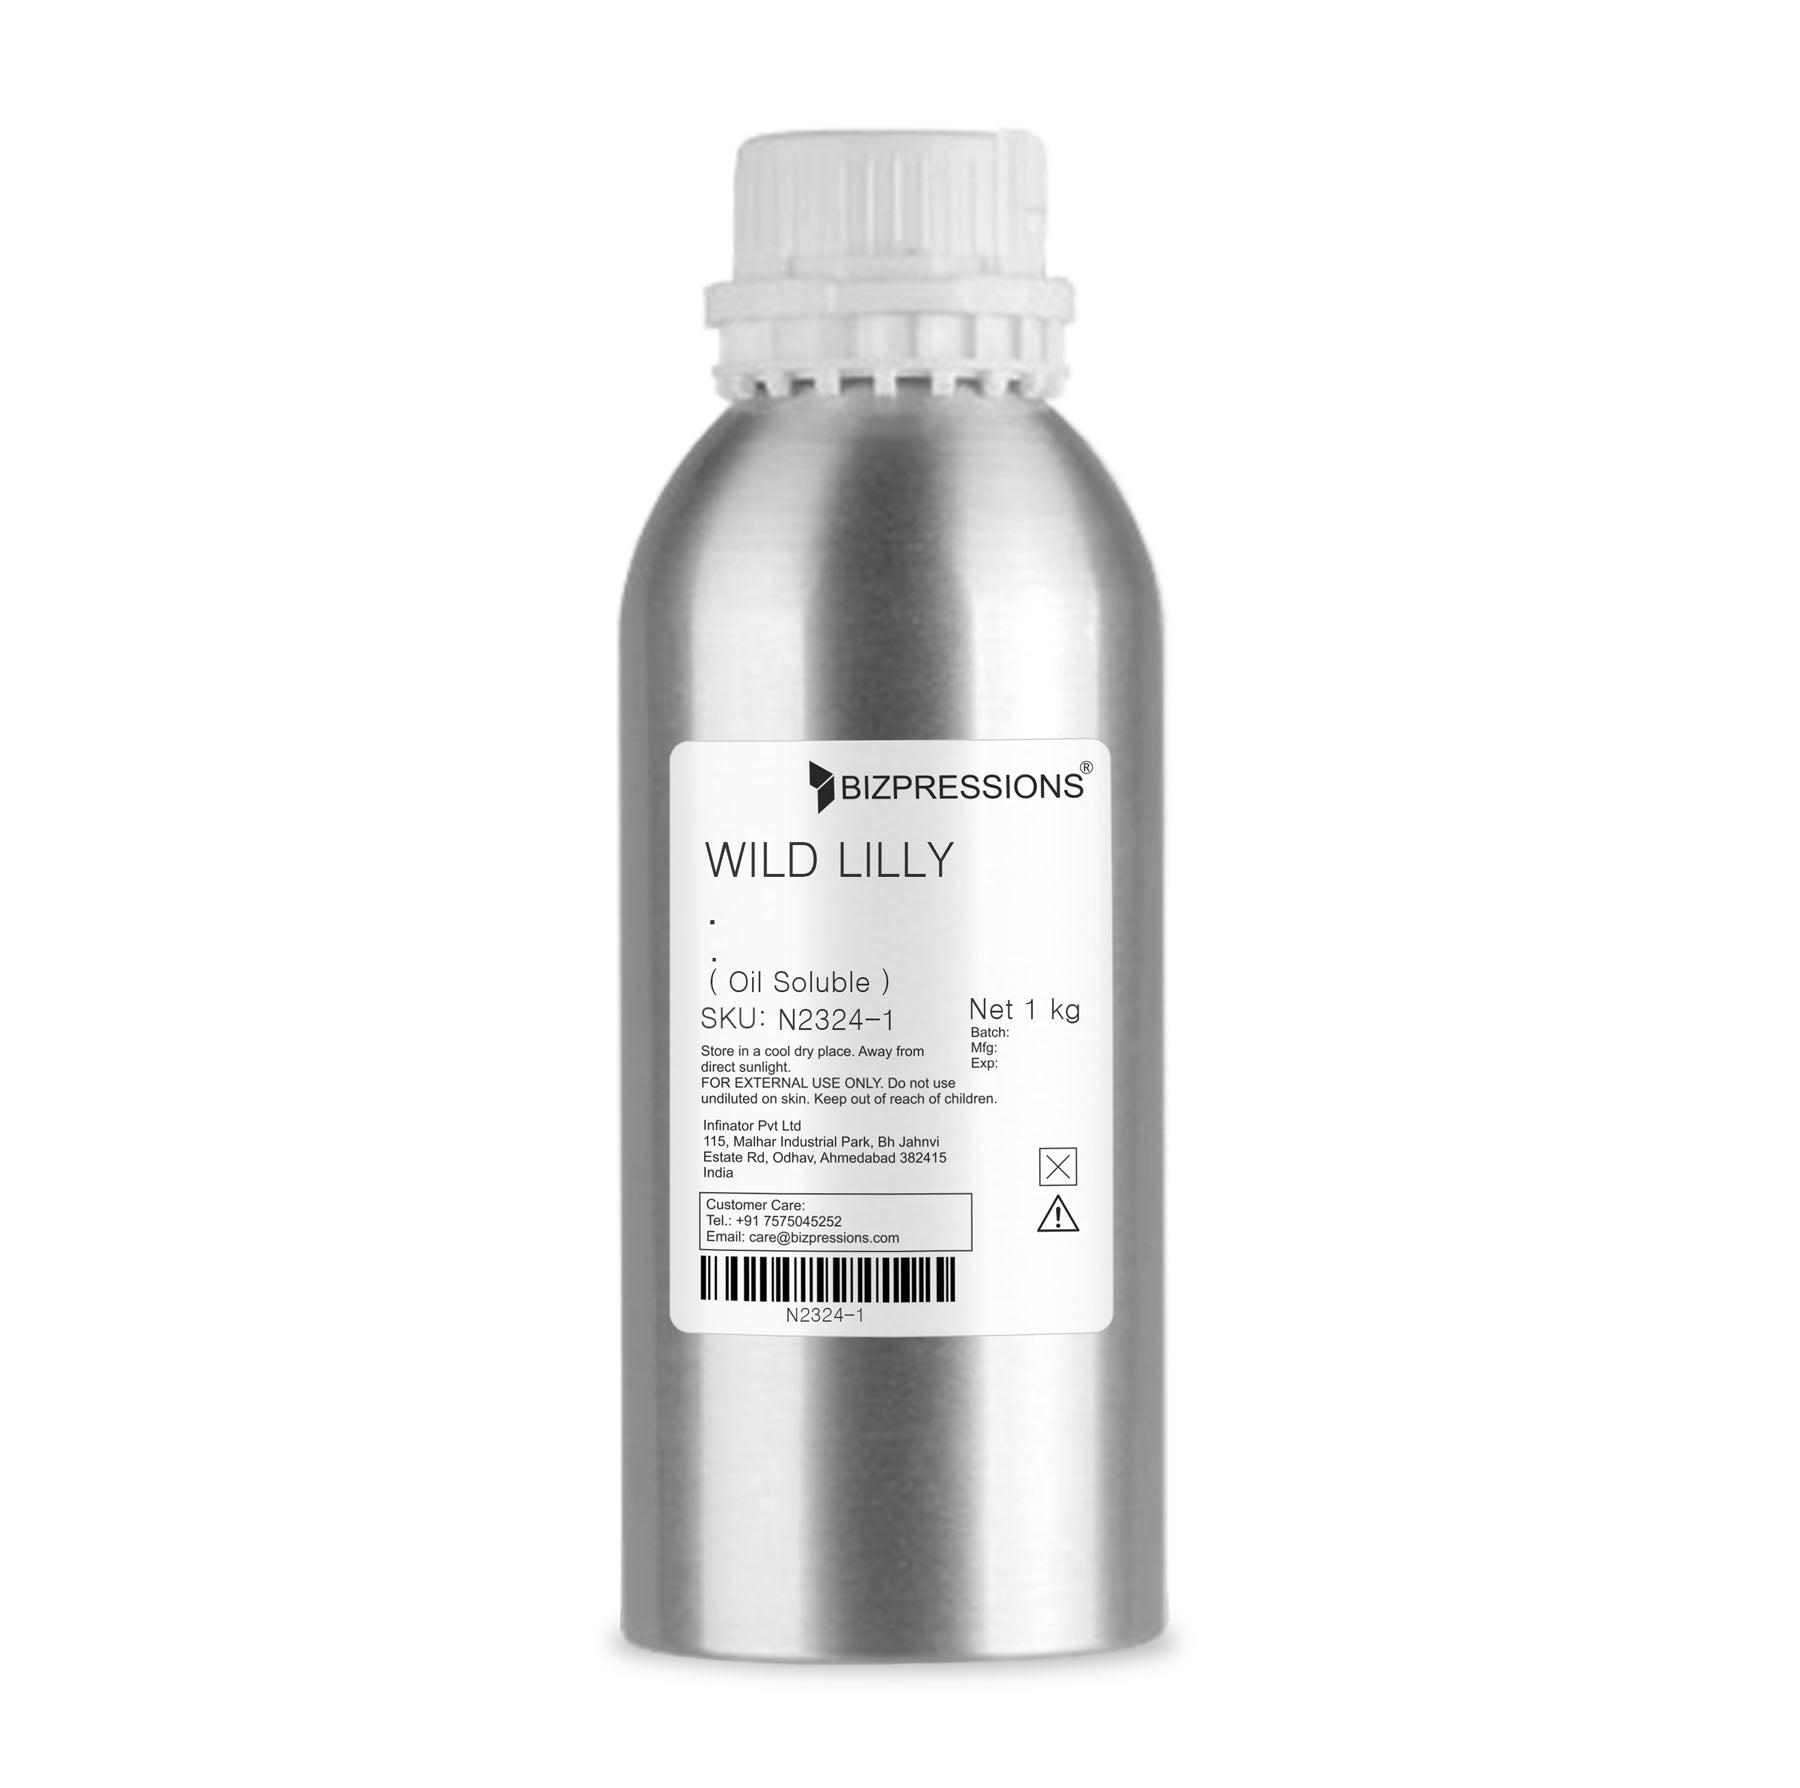 WILD LILLY - Fragrance ( Oil Soluble ) - 1 kg